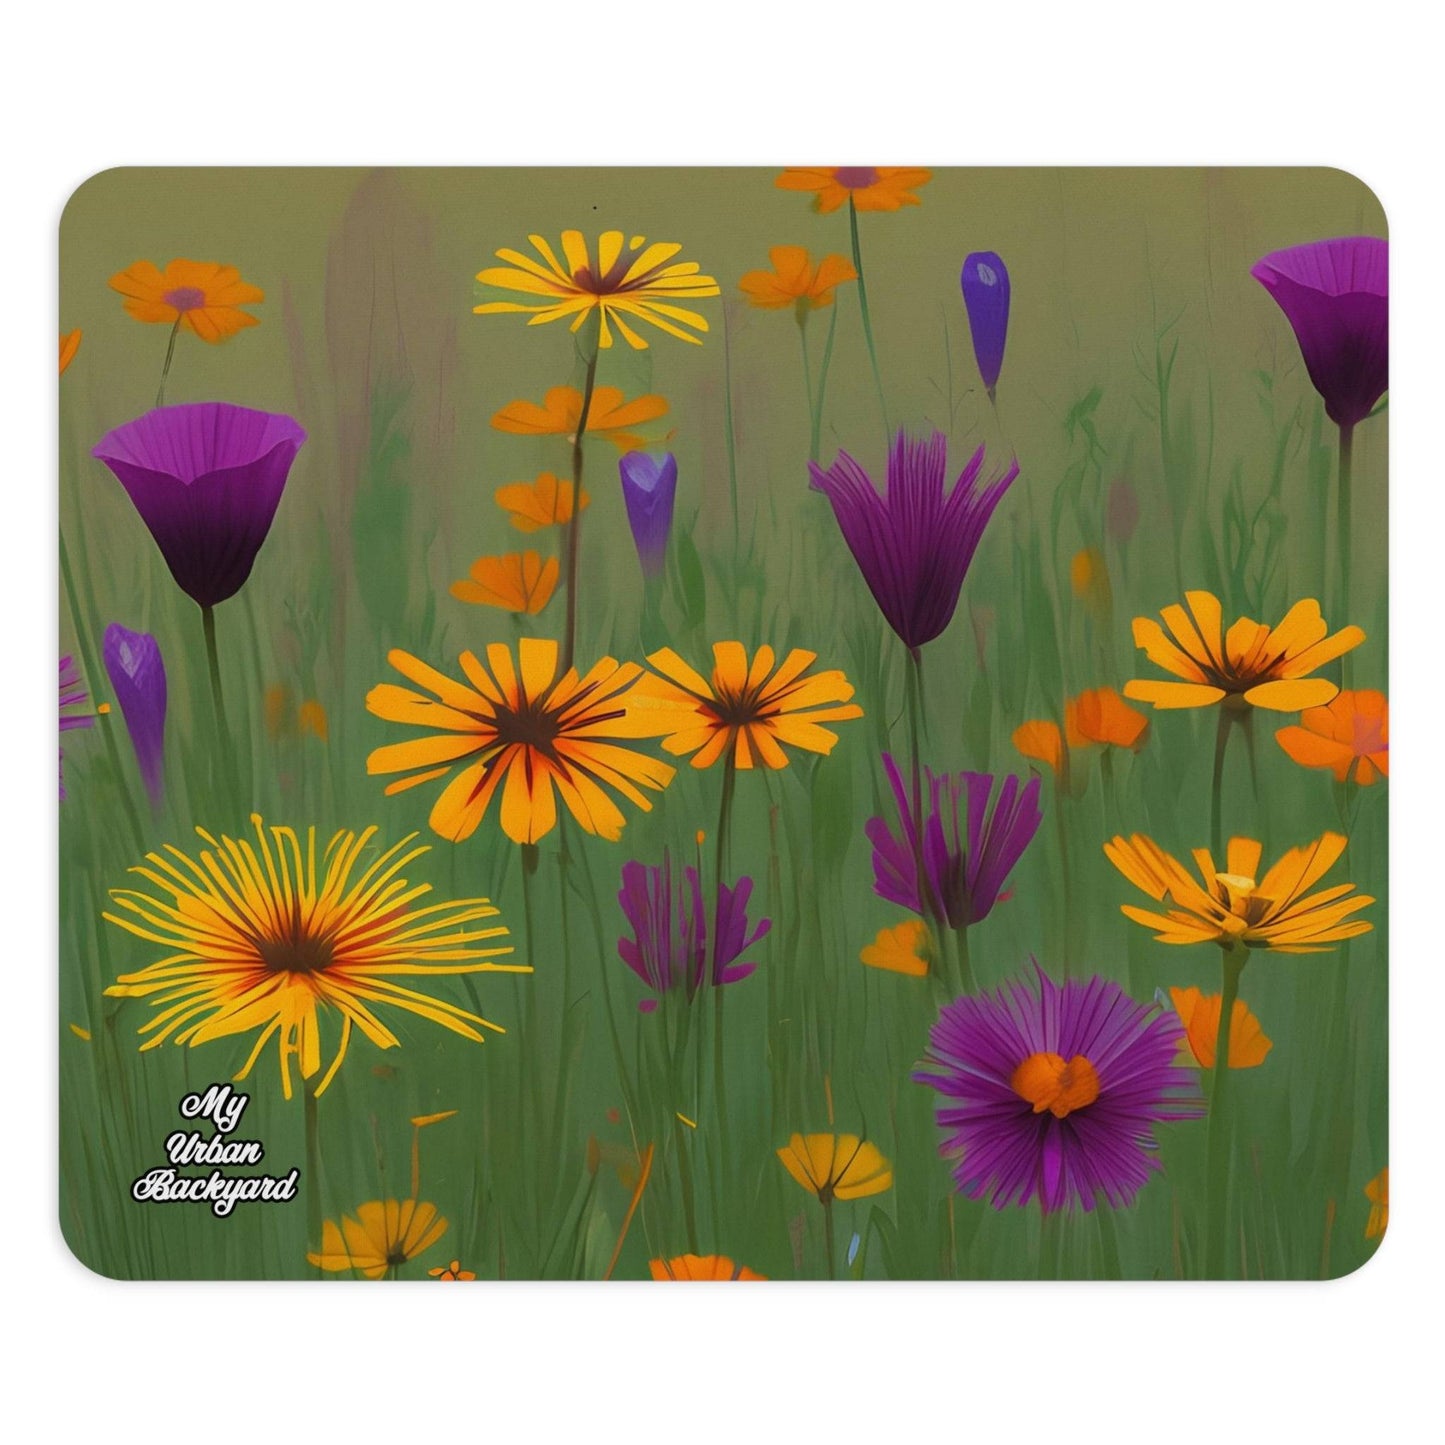 Computer Mouse Pad, Non-slip rubber bottom, Orange and Purple Wildflowers